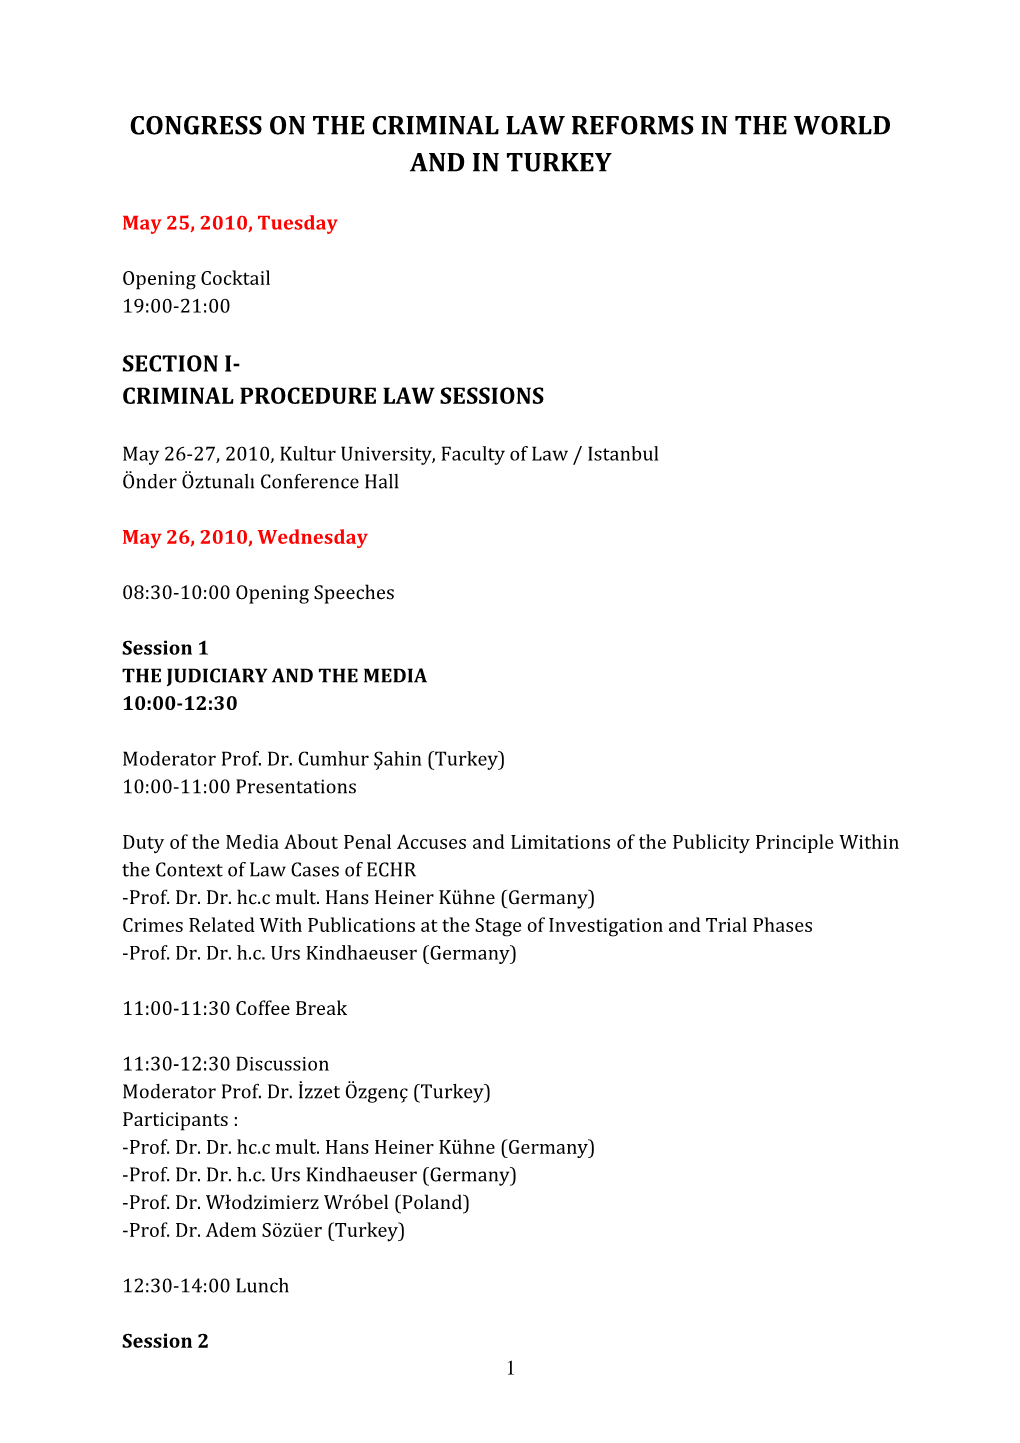 Congress on the Criminal Law Reforms in the World and in Turkey